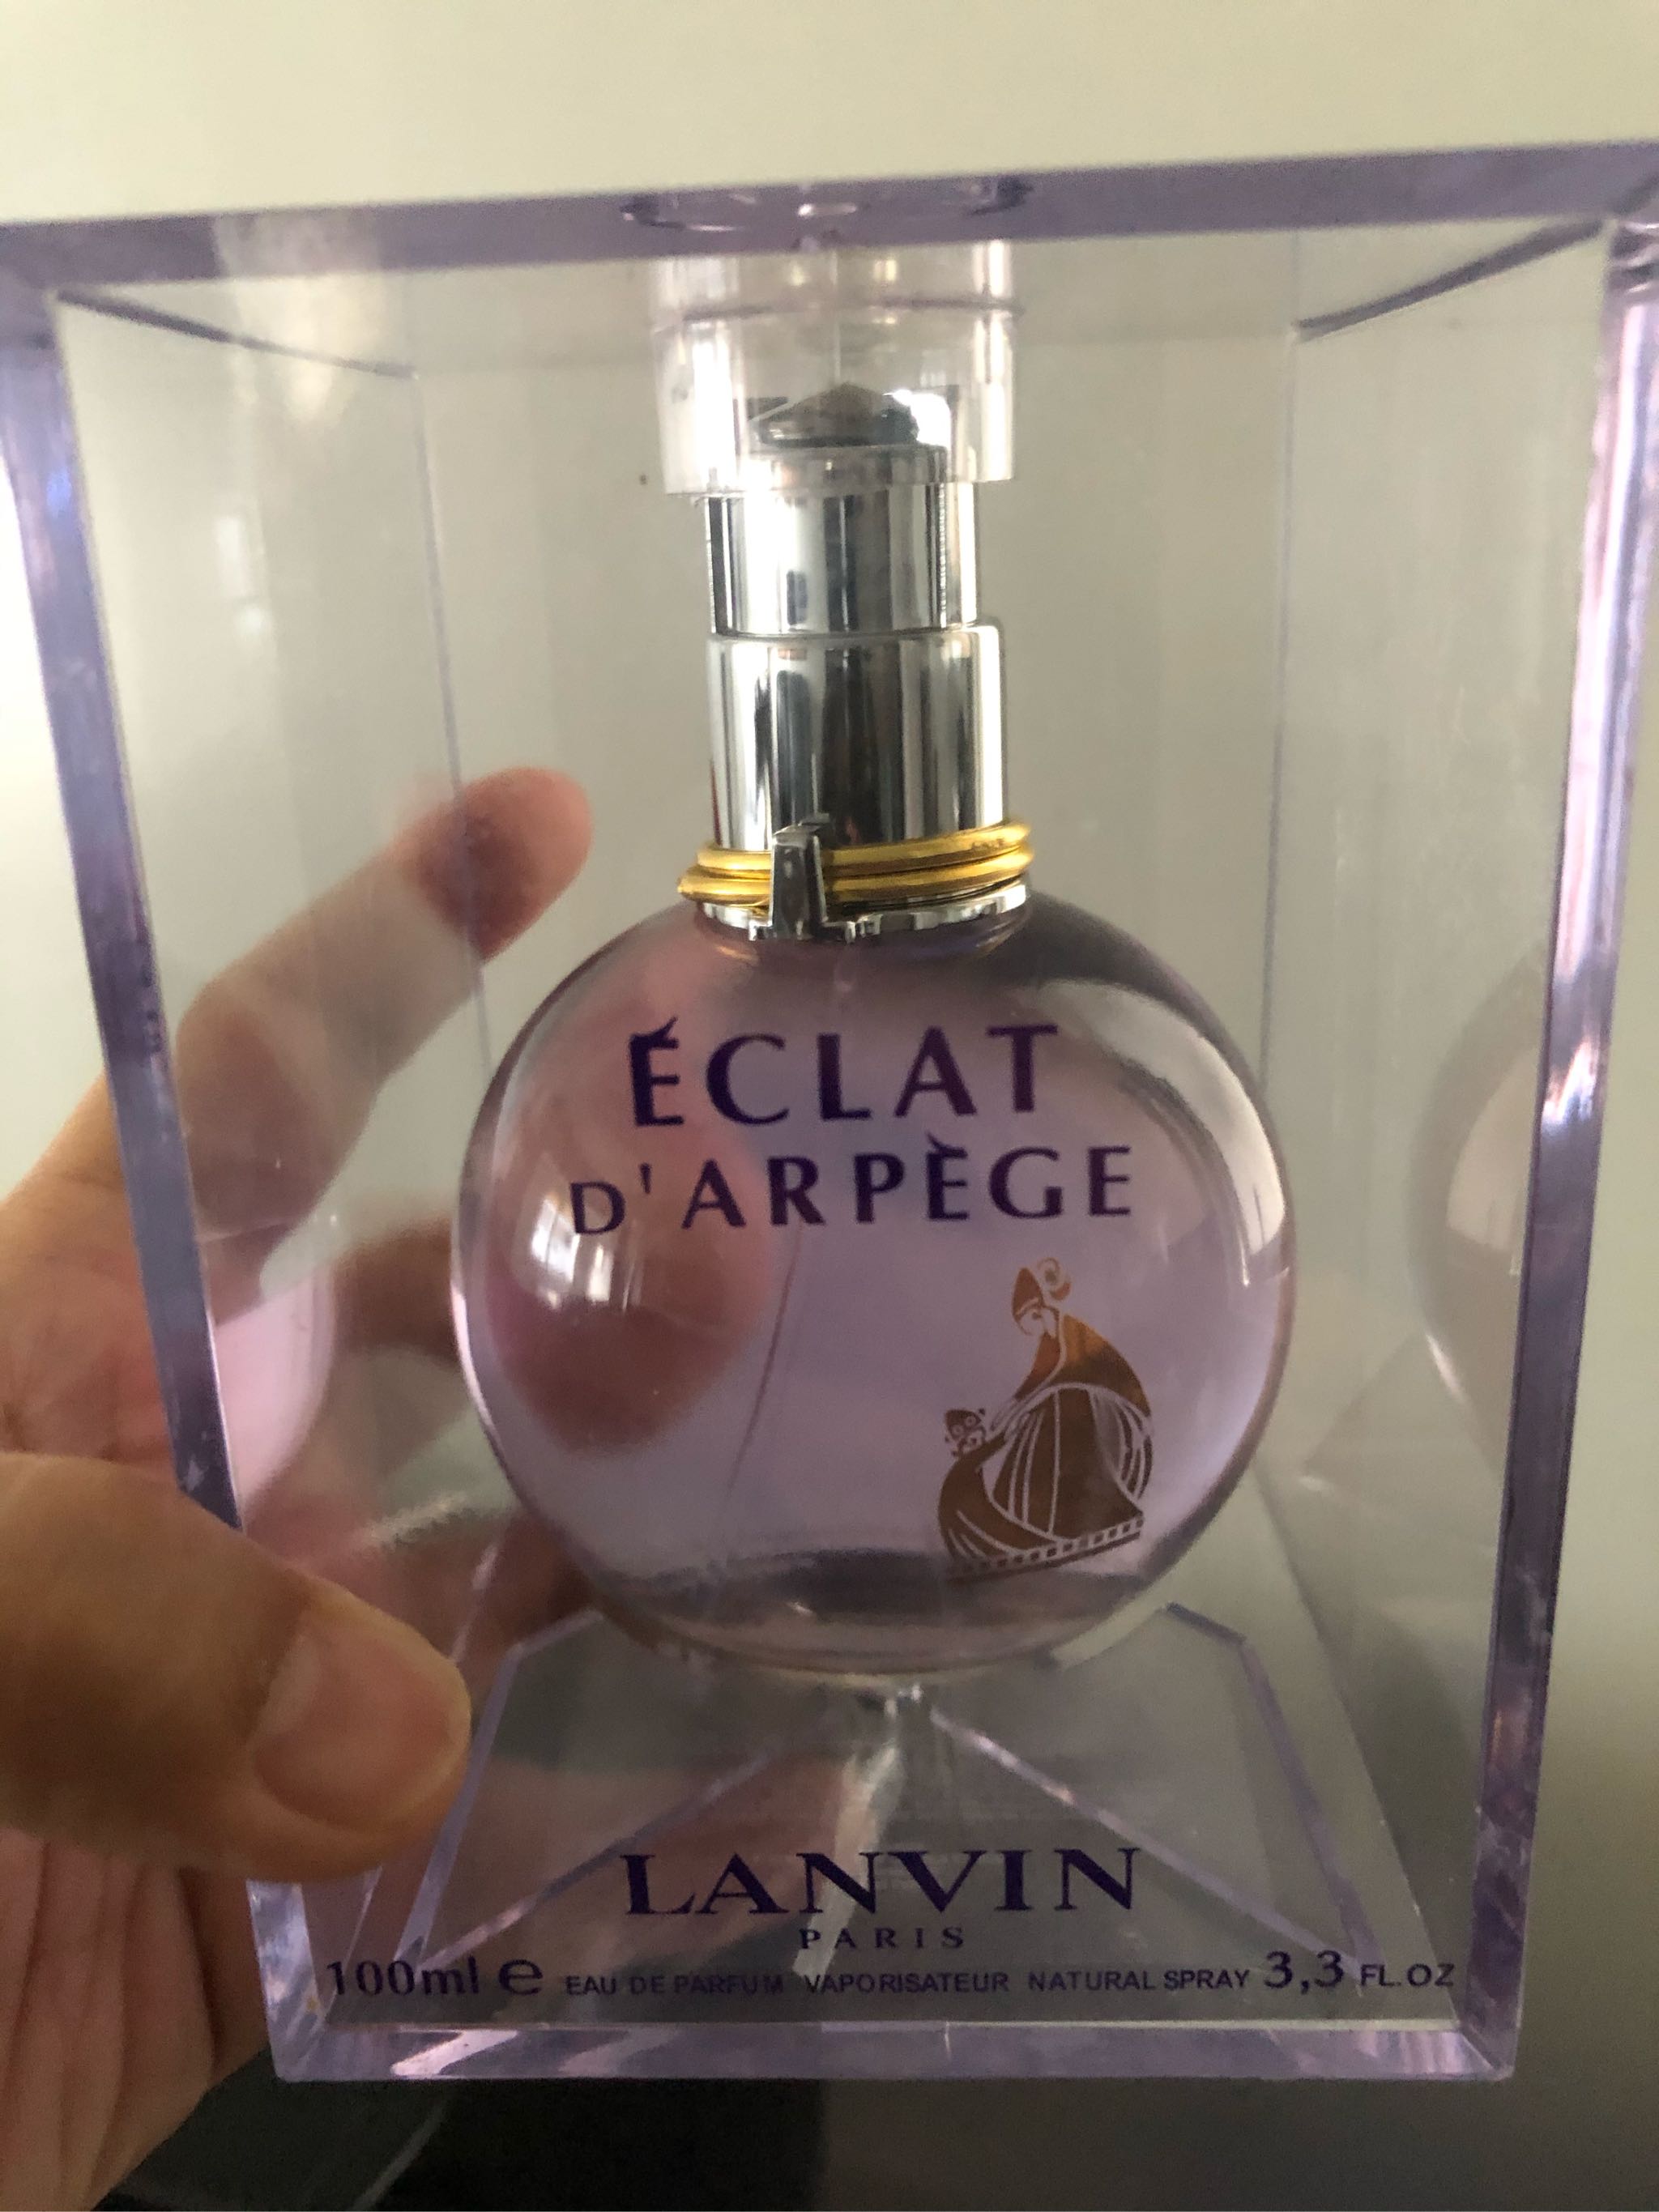 Perfumery 101 - Lanvin Eclat D' Arpege Authentic Dubai Tester Perfumes  (Claimed As US Tester Perfumes By Other Sellers, Sold At 900-1500 Each) Our  Price: 1 - 3 pcs @ 600 each